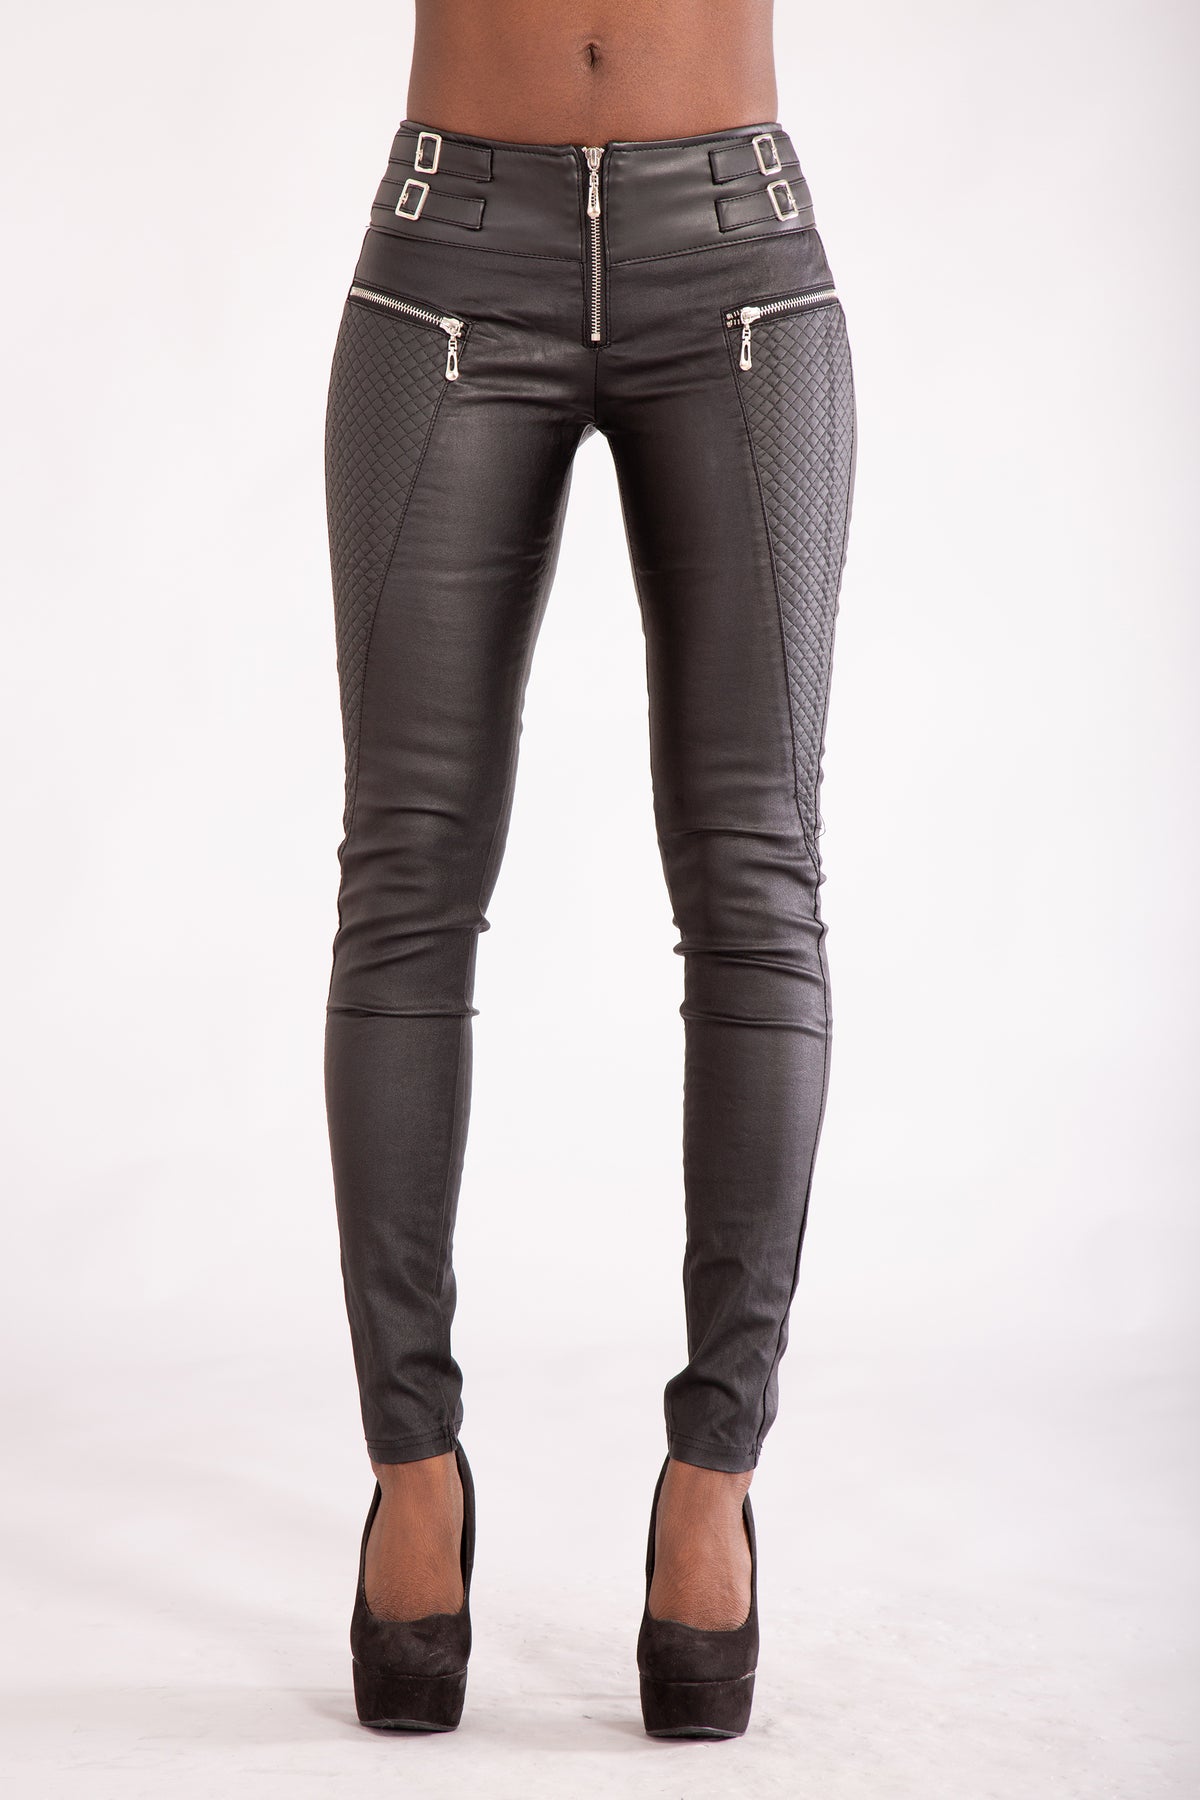 Ladies Black Wet Leather Look Skinny Trousers with zips – Lusty Chic